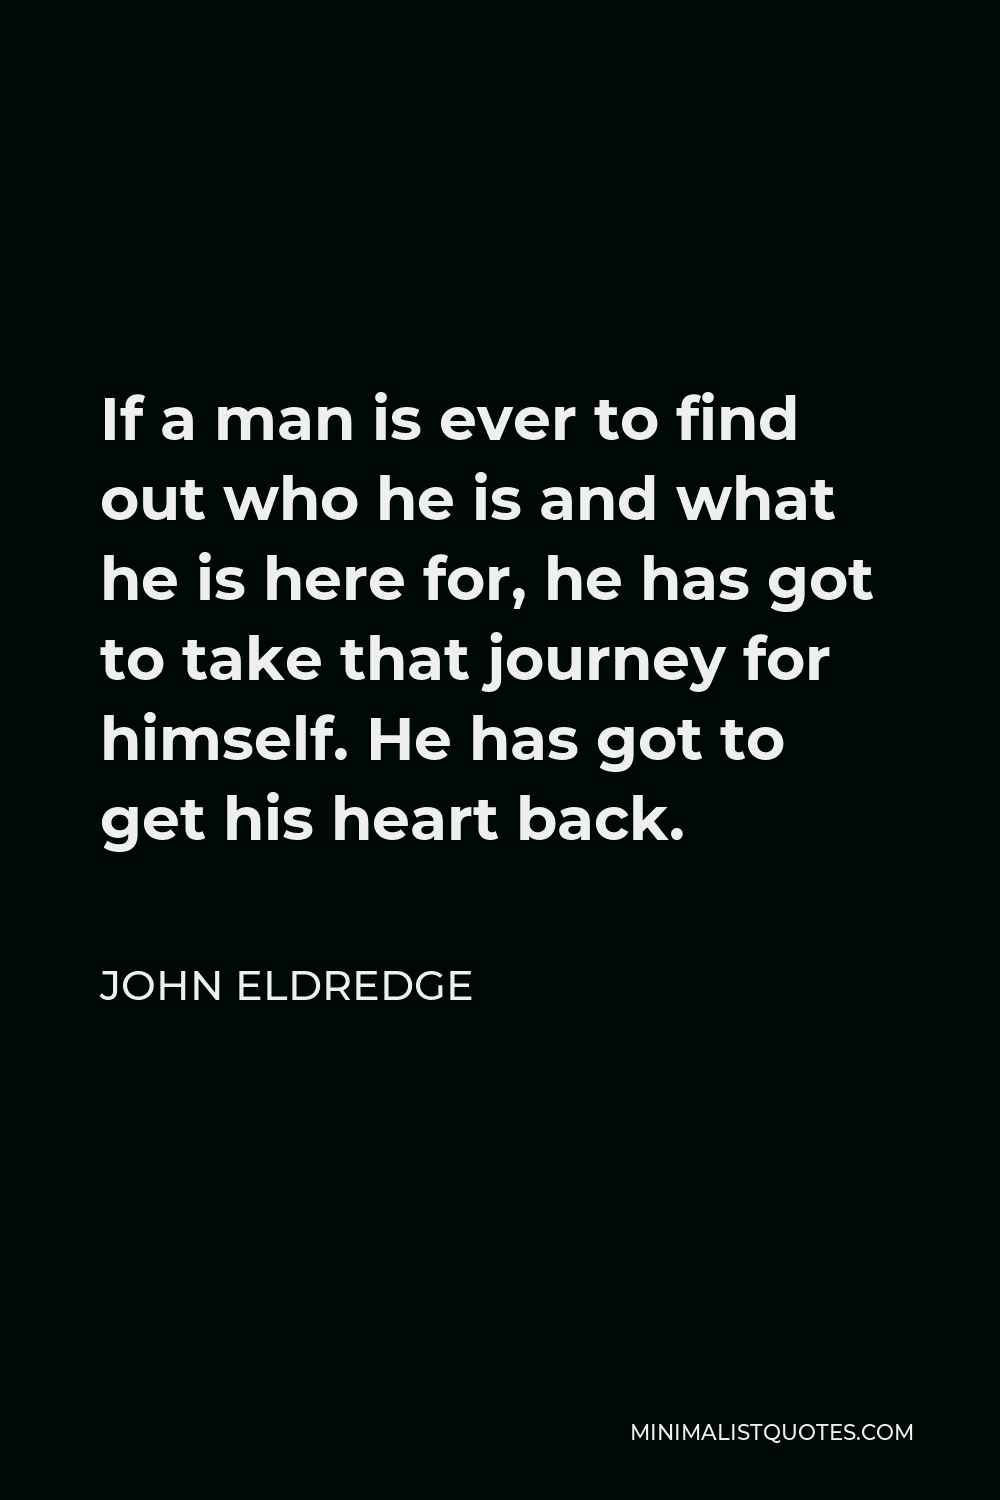 John Eldredge quote: If we can reawaken that fierce quality in a man